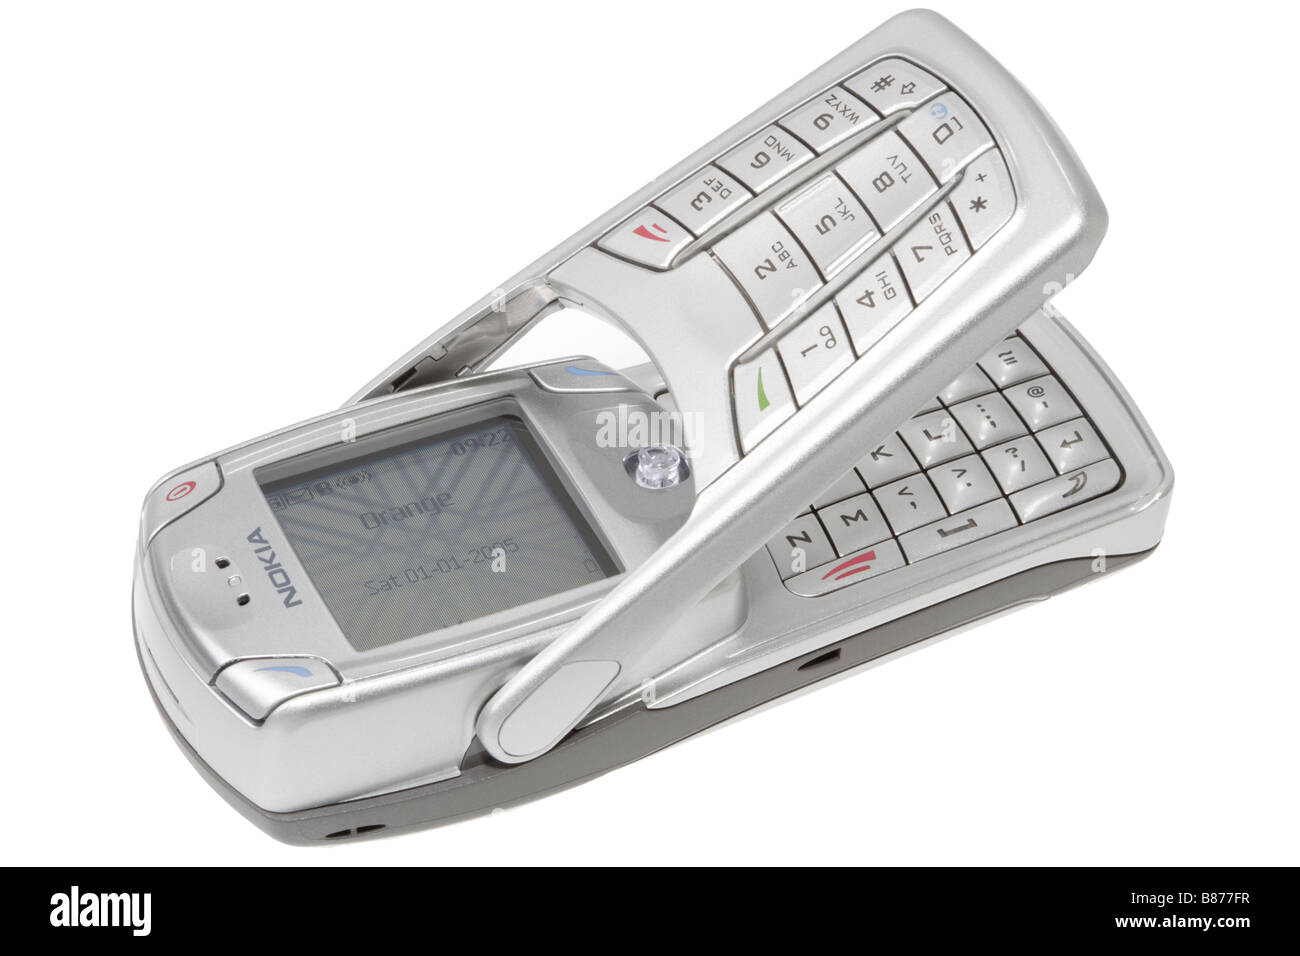 Nokia mobile telephone cellphone and keyboard Stock Photo - Alamy